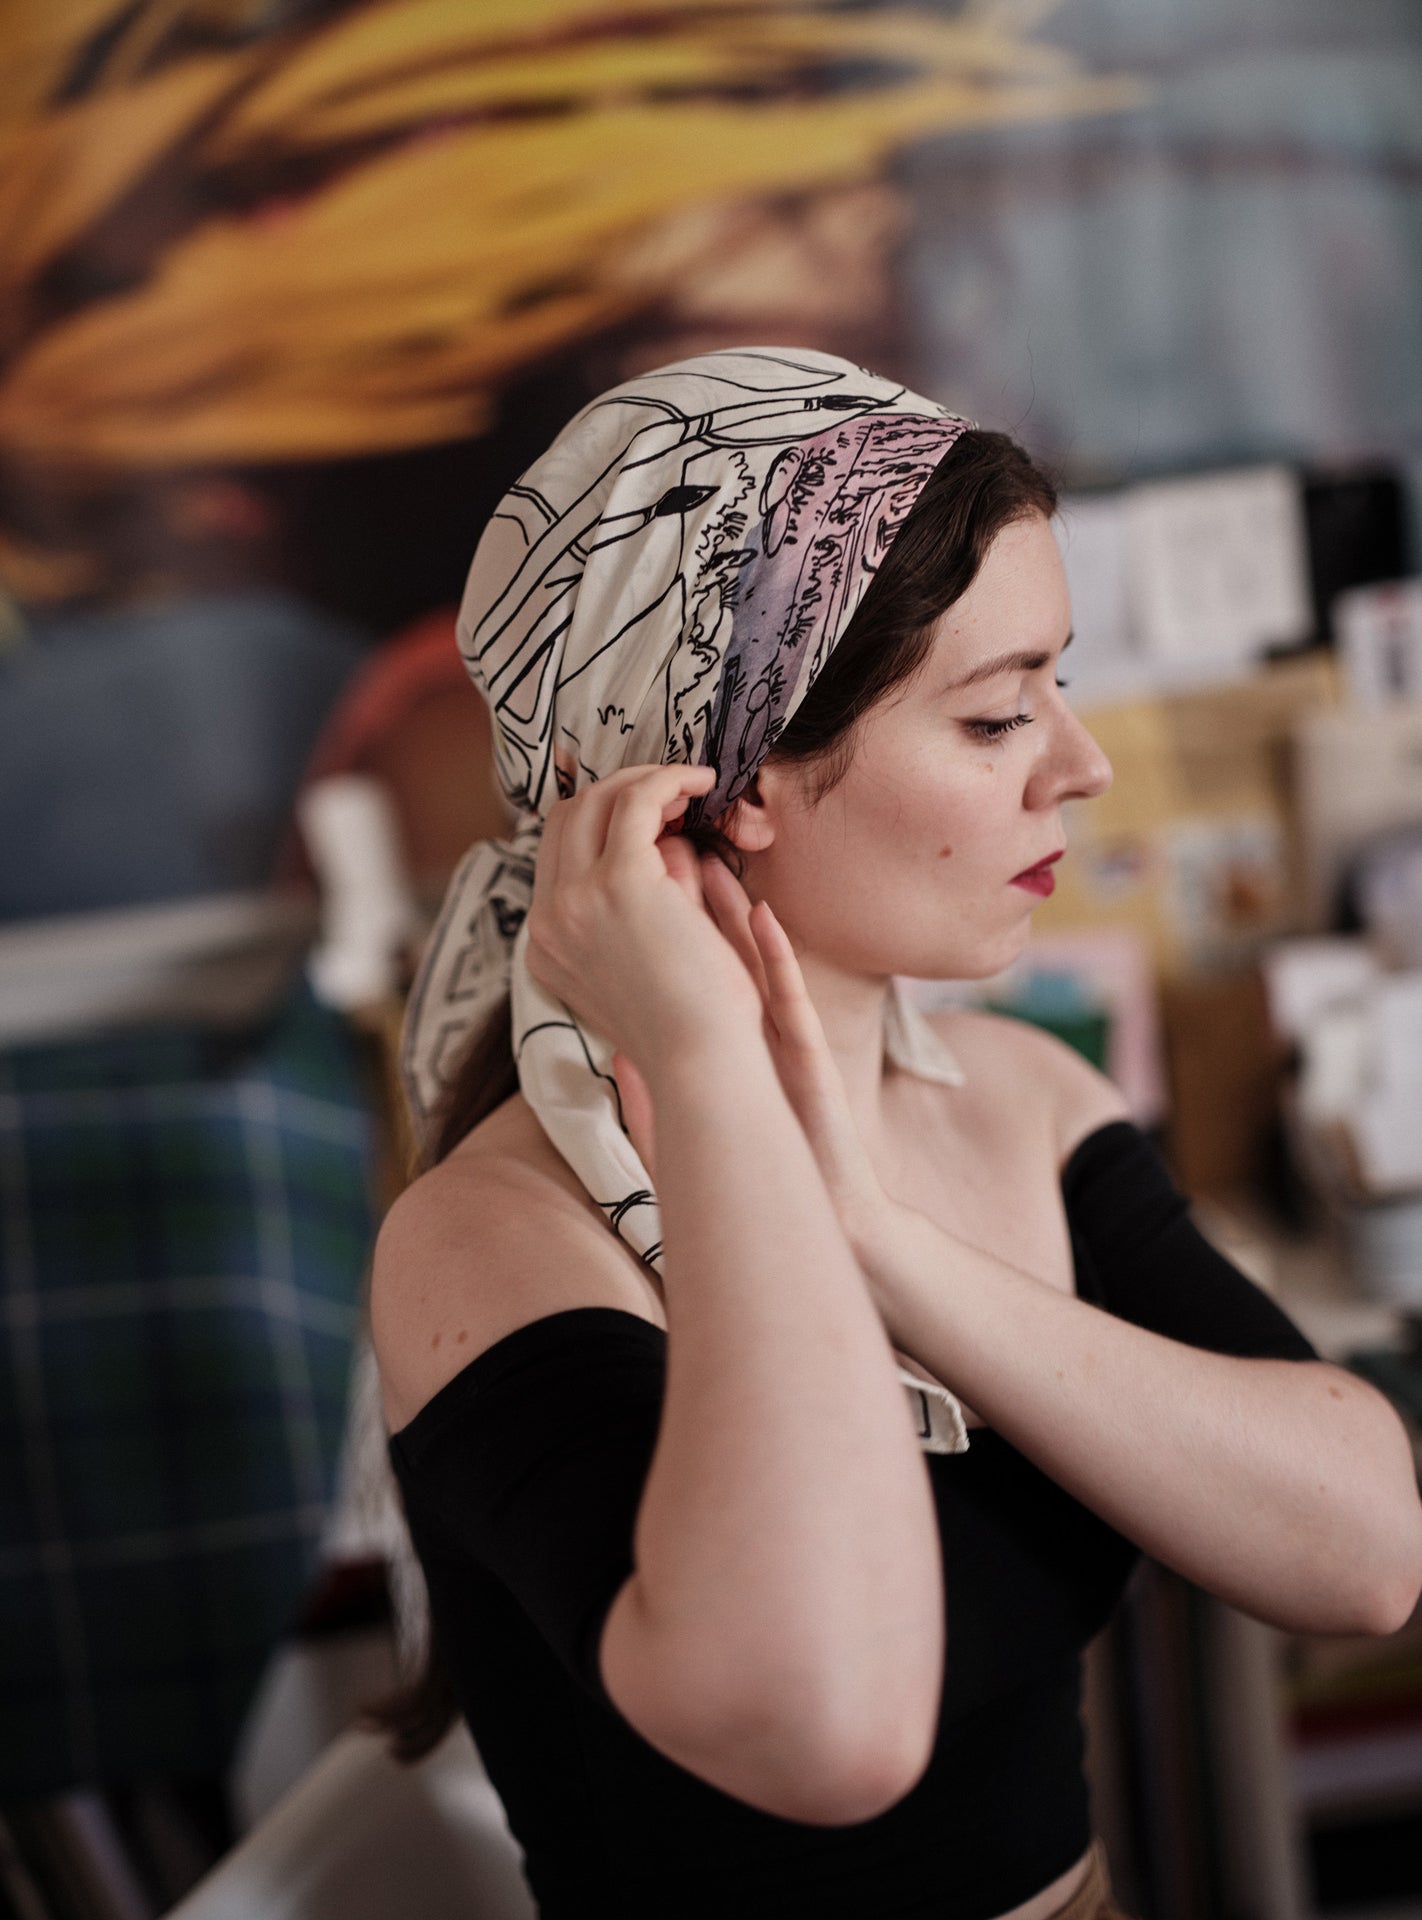 Sacha with the Scarf made in collaboration with Thierry Colson, photographed in her studio by Stéphane Gautronneau 